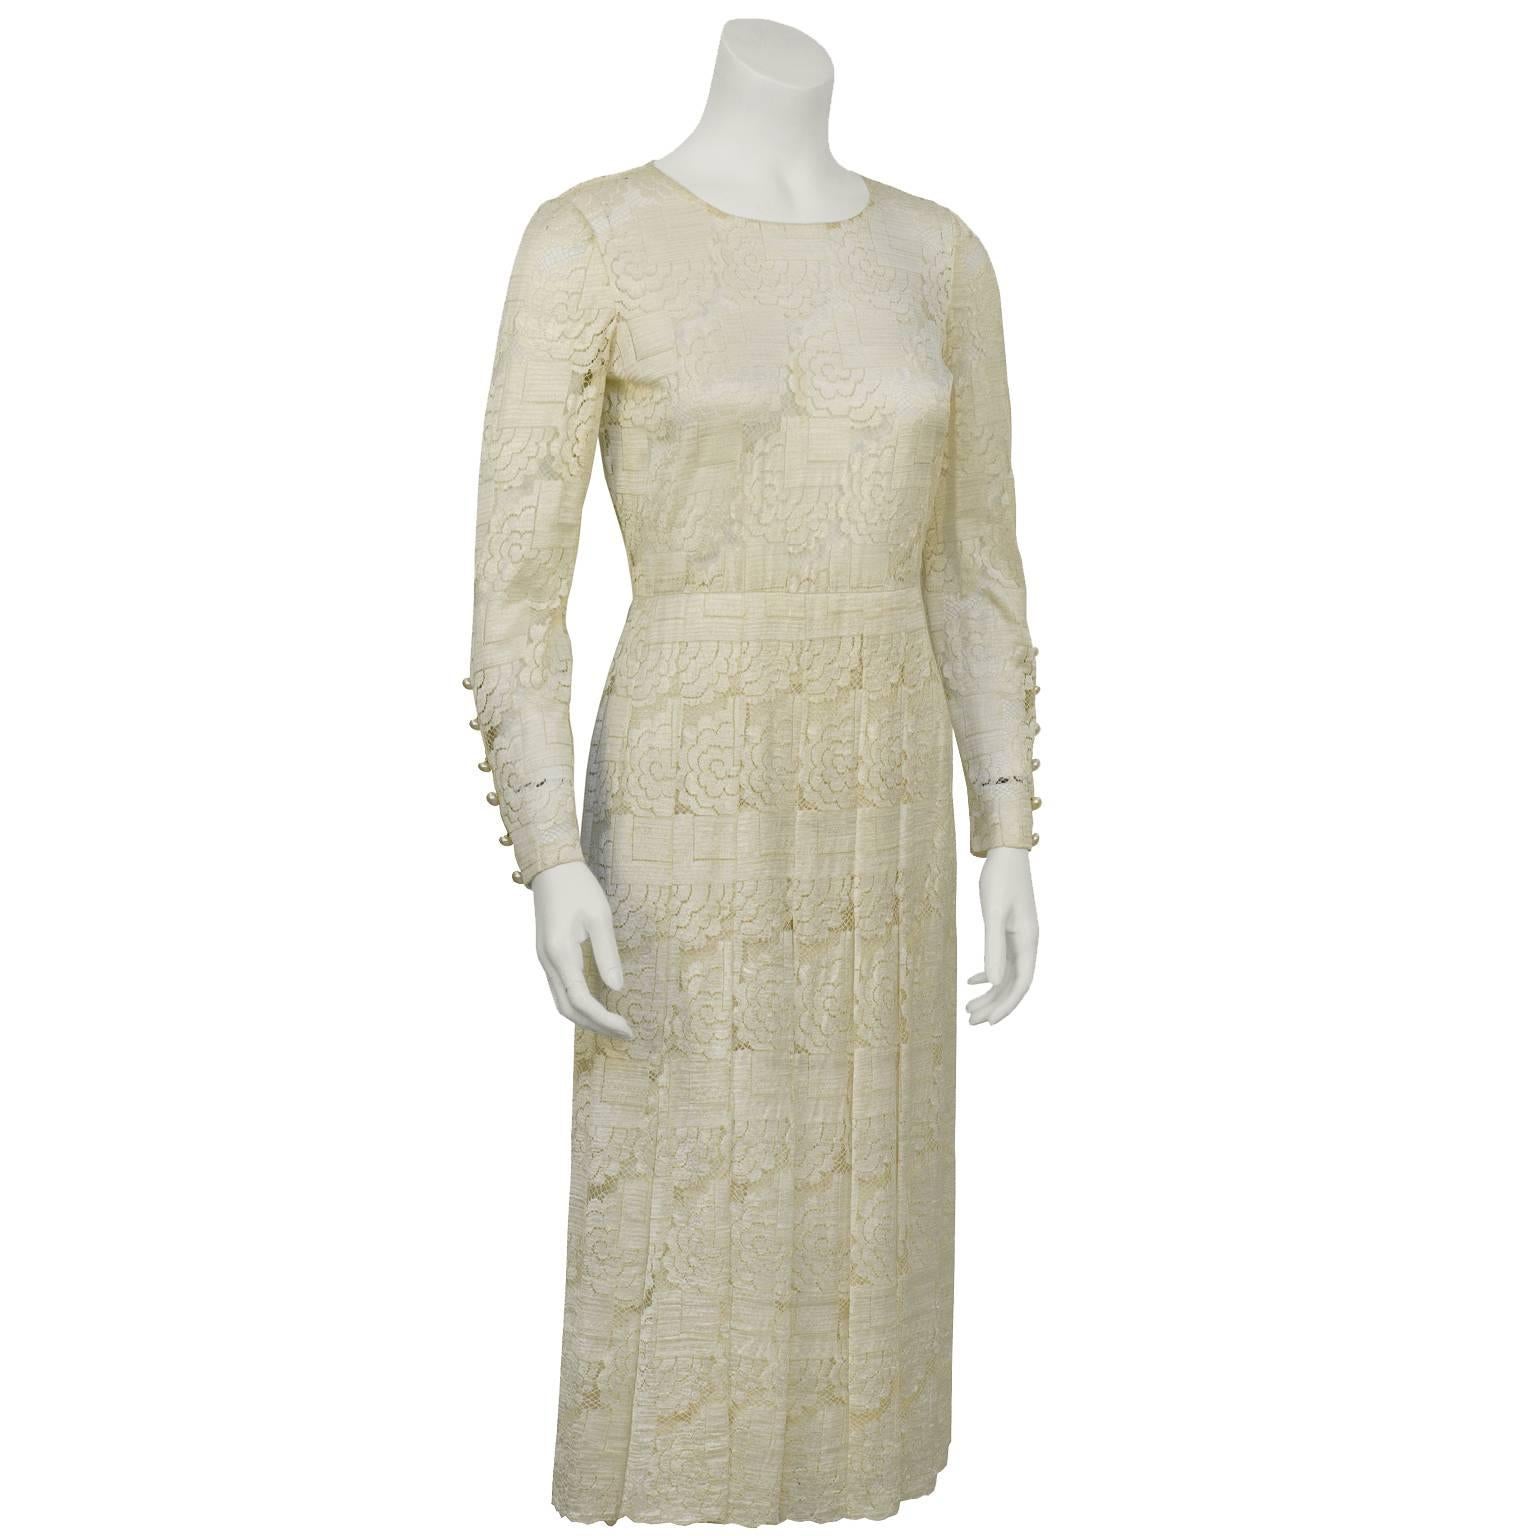 1960's tea length cream lace dress attributed to Dior, label missing however provenance is from a well known Dior client  in Canada. Round neckline, long sleeves finished with off white pearl buttons, fitted through the waist with stitched box